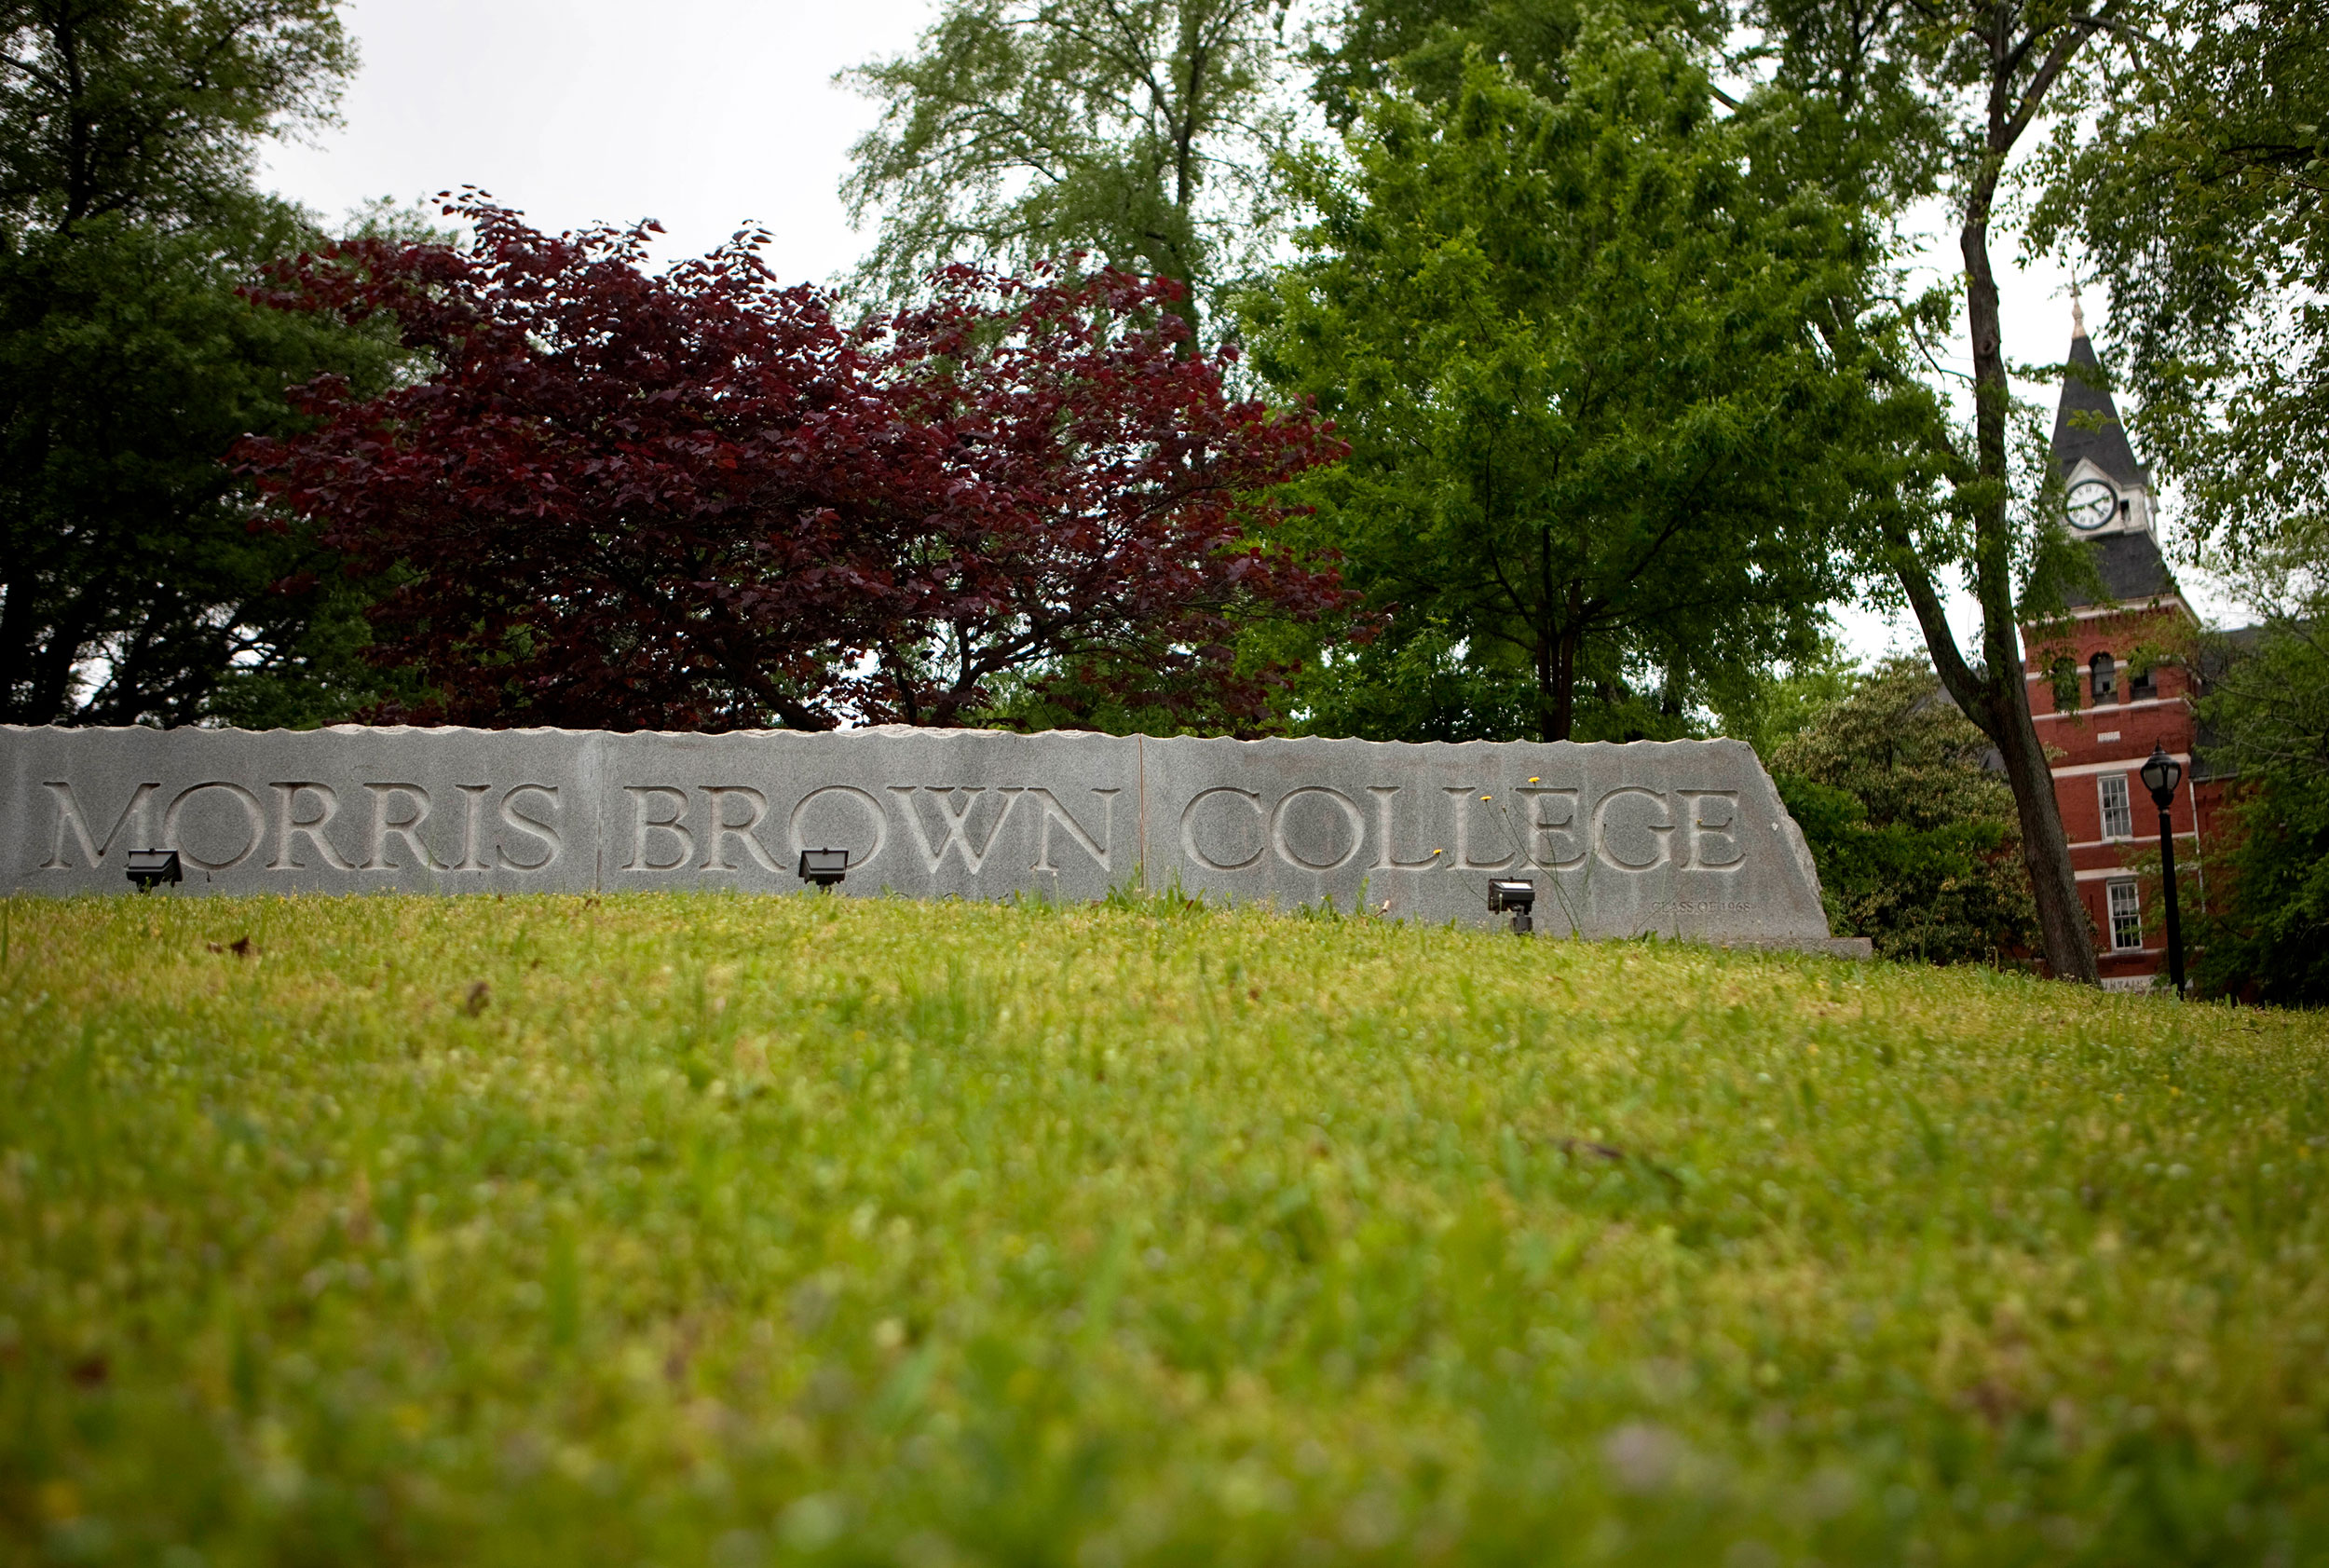 Morris Brown College Receives Full Accreditation After Losing It 20 Years Ago